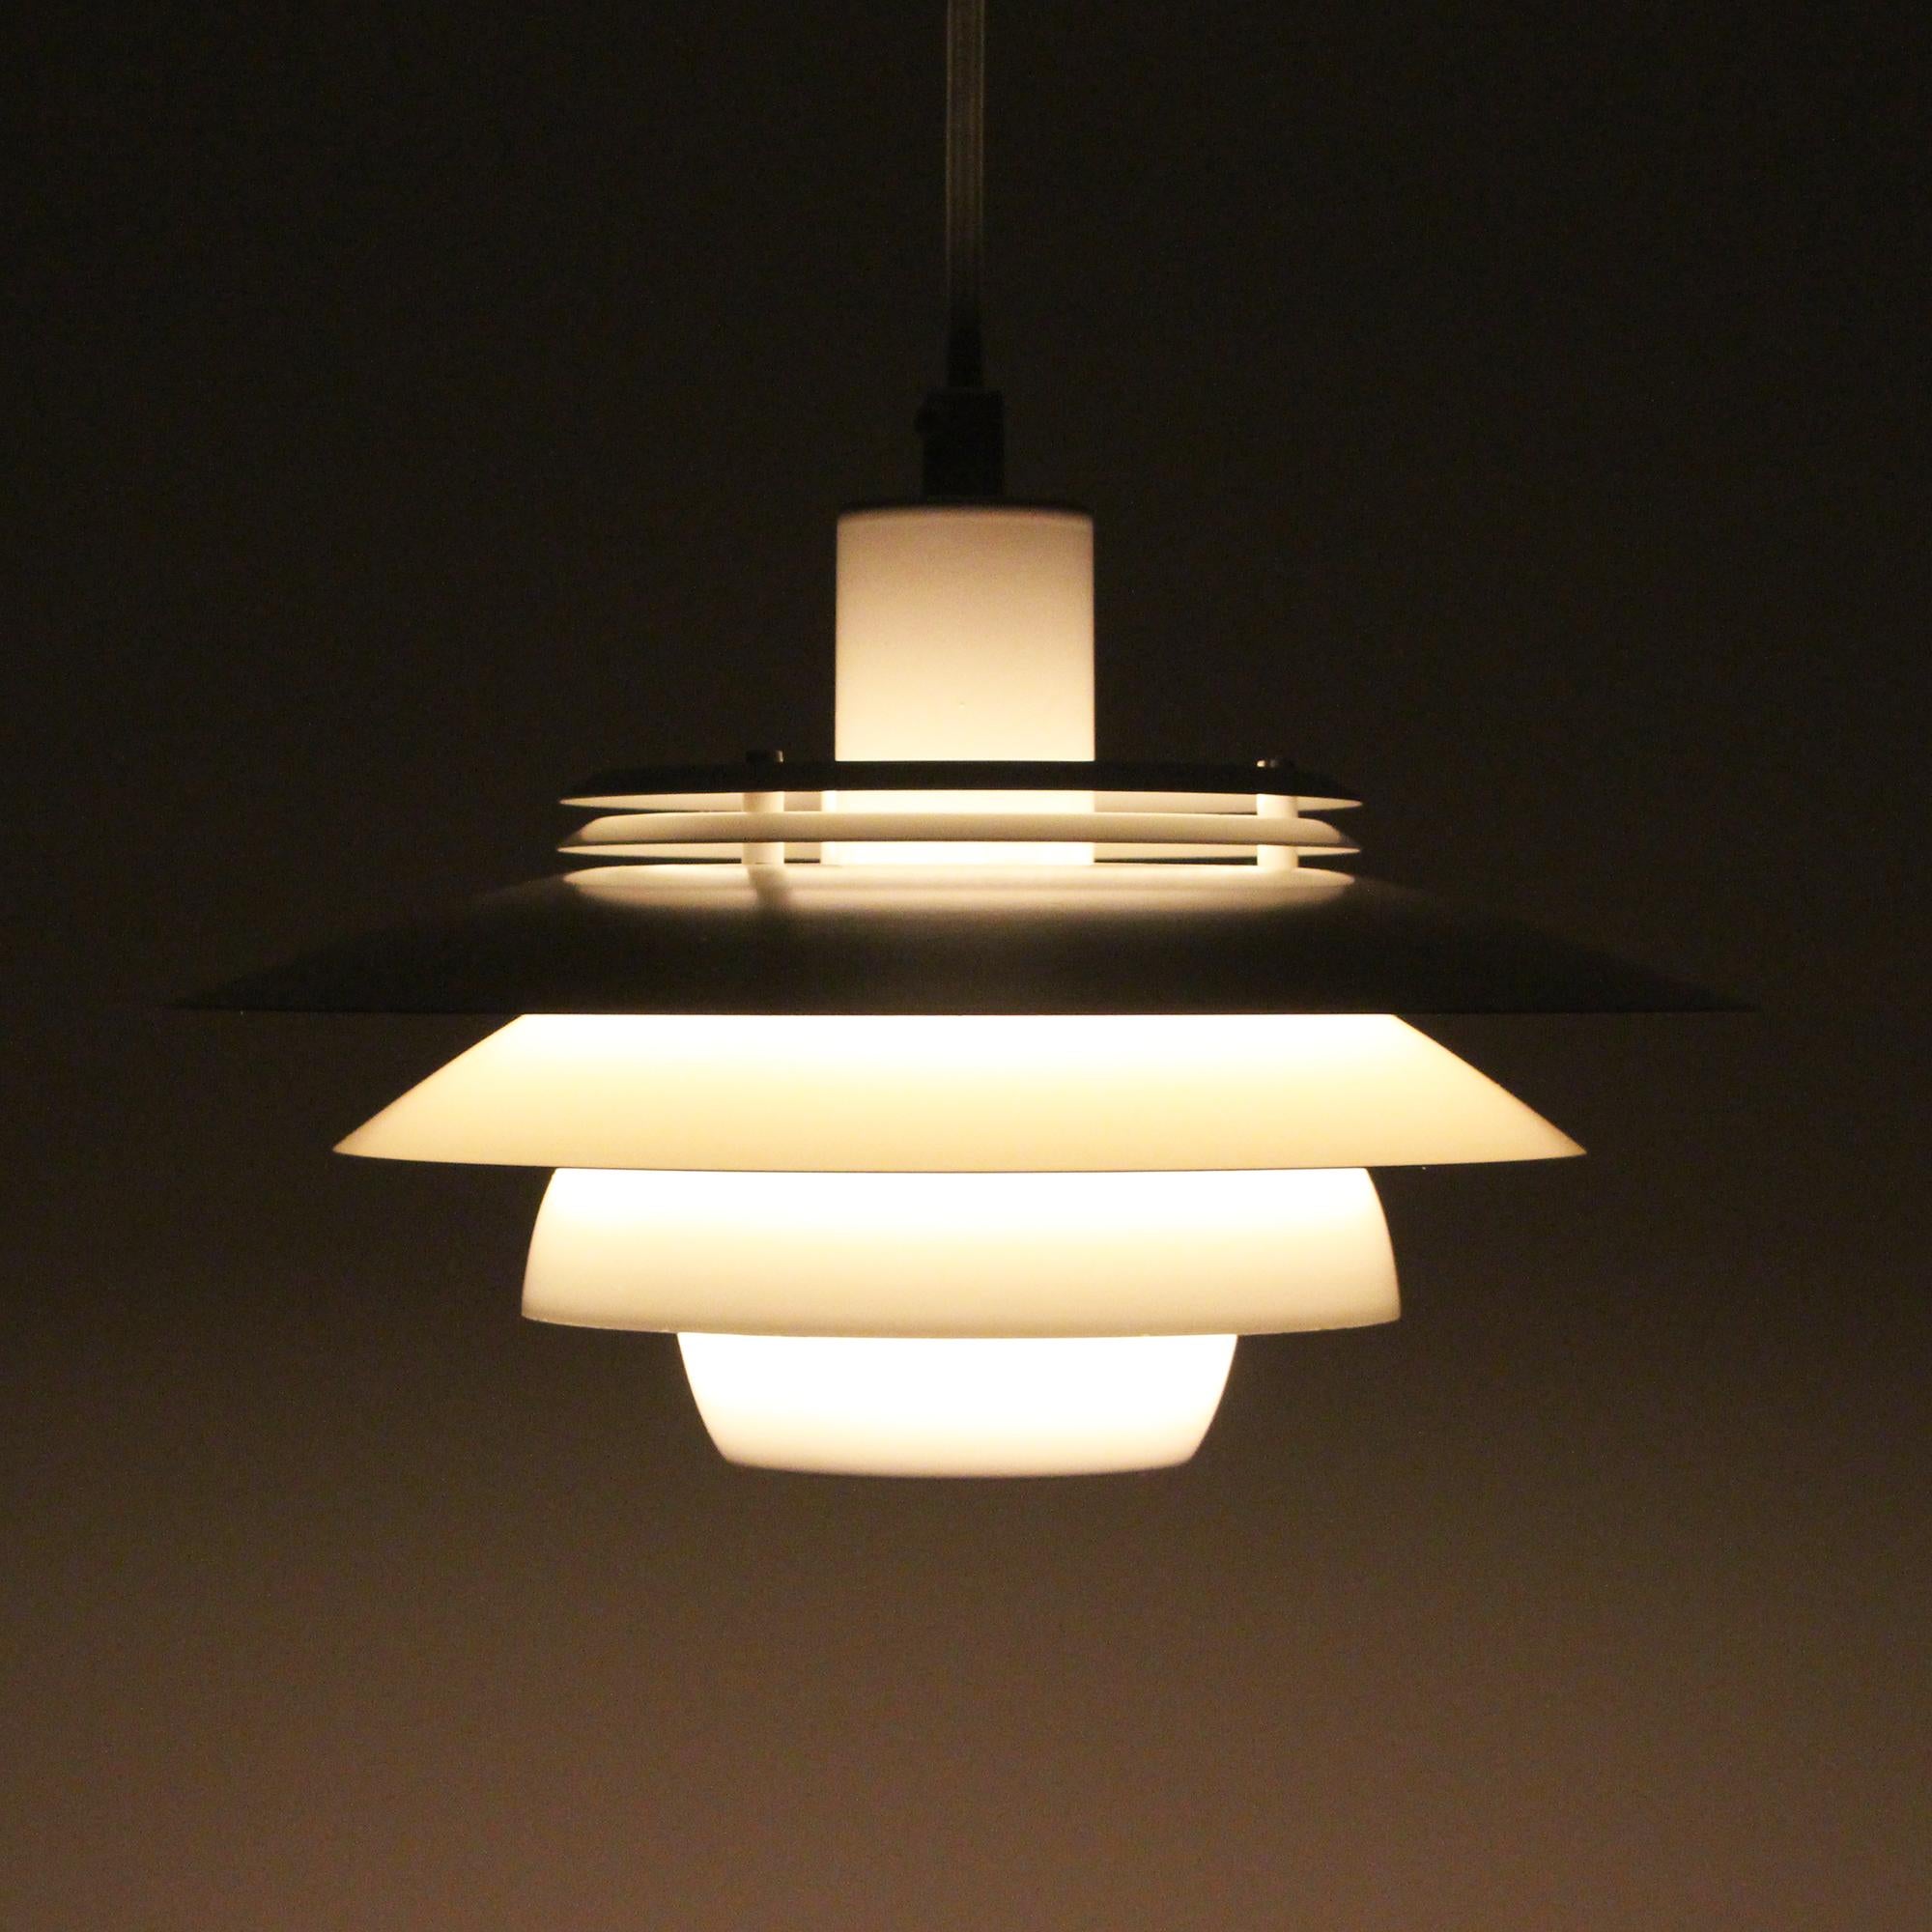 Dania, No. 2030 white lamp by Danish Jeka Metaltryk in the 1980s, stylish white hanging lamp in good vintage condition.

A Minimalist pendant light with 4 circular white metal shades, placed on white lacquered metal 'spacers' at a narrow distance